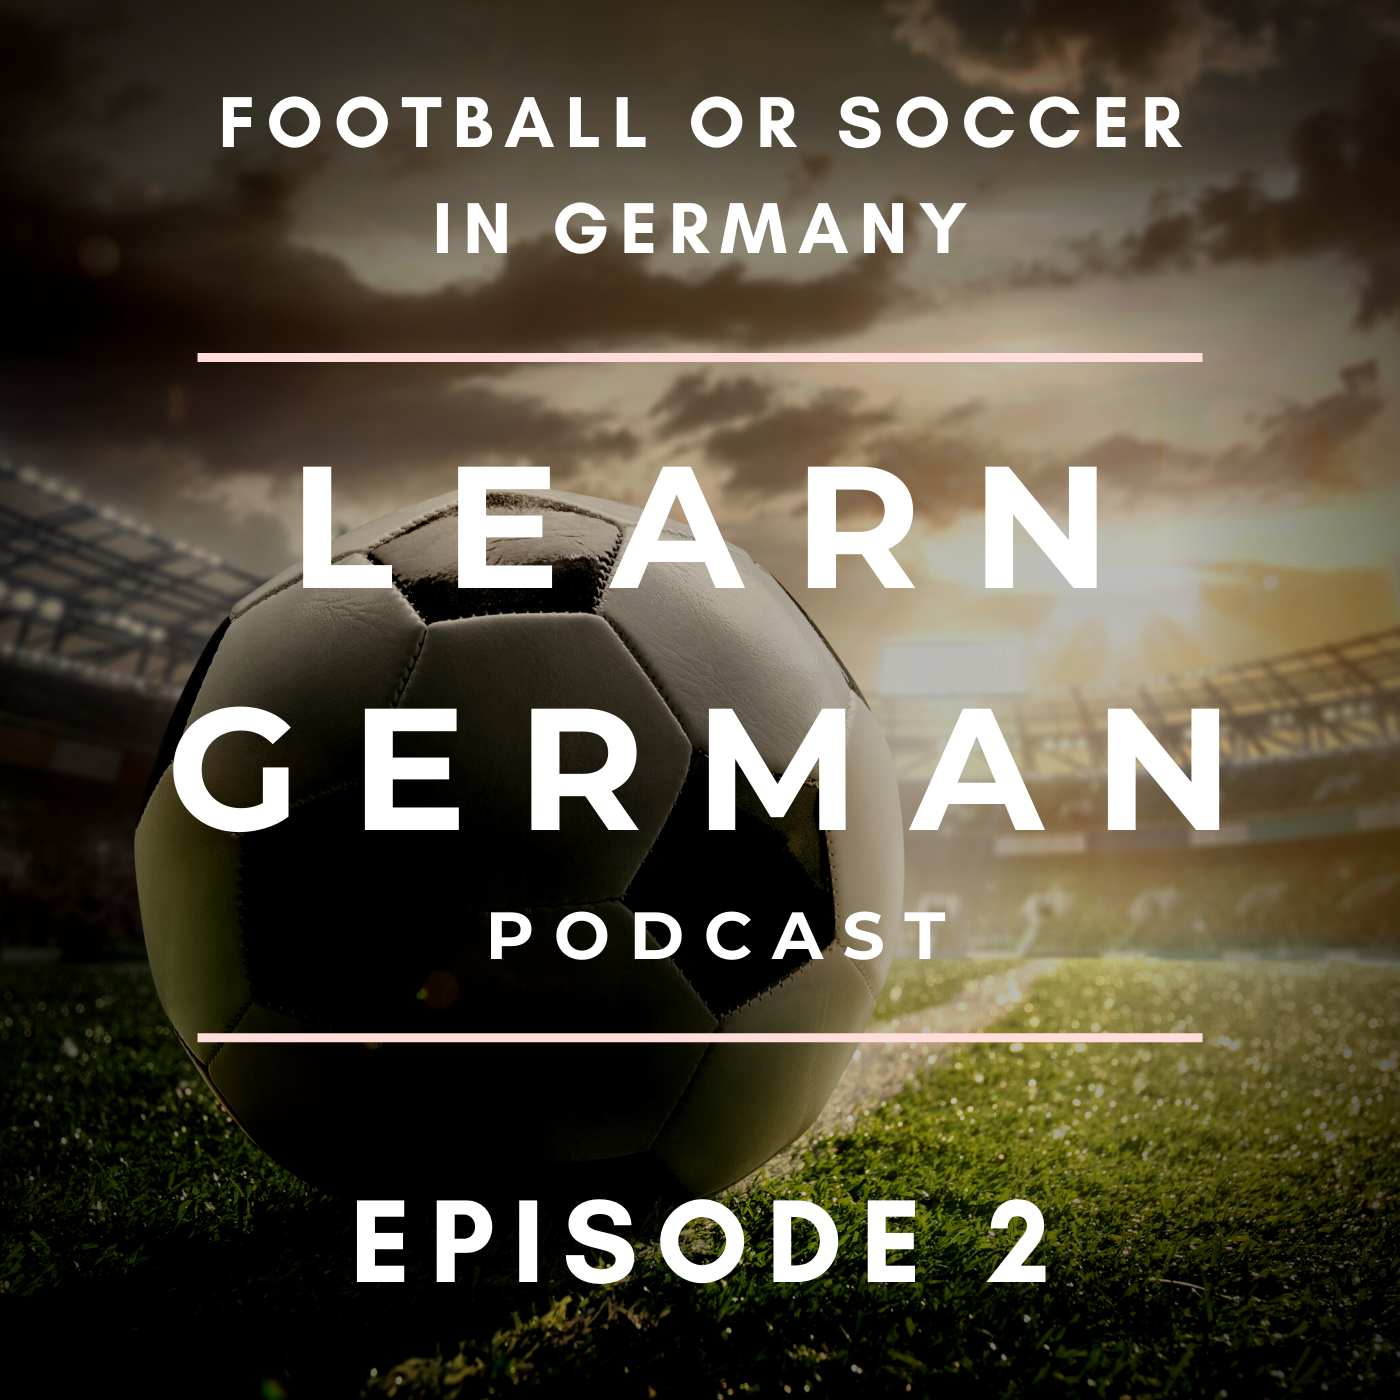 Learn German Podcast: Football or Soccer in Germany (Episode 2)